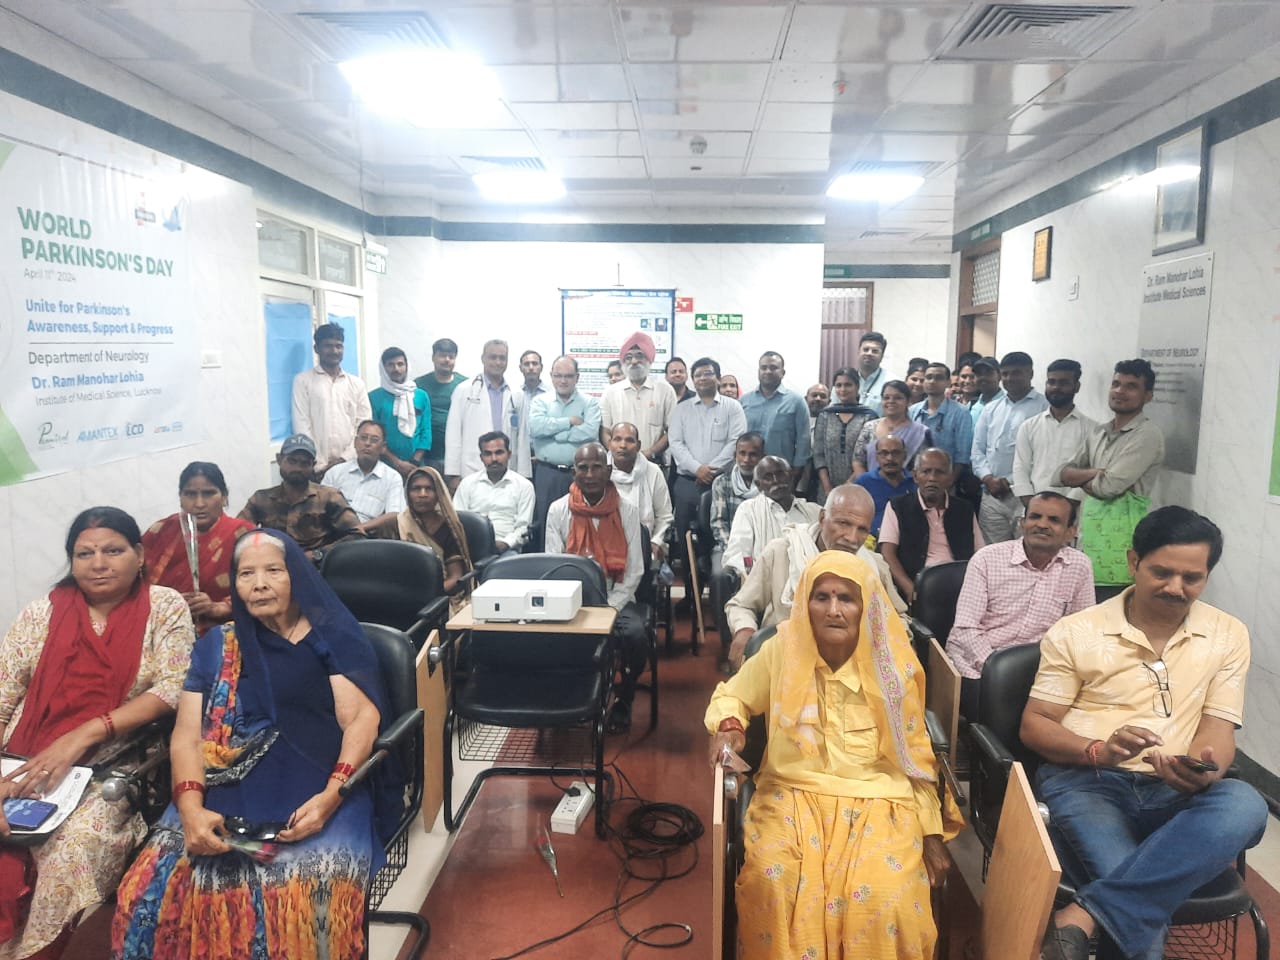 Neurology Department launched awareness campaign on World Parkinson's Day in Dr. Ram Manohar Lohia Institute of Medical Sciences, Lucknow, organized seminar, workshop